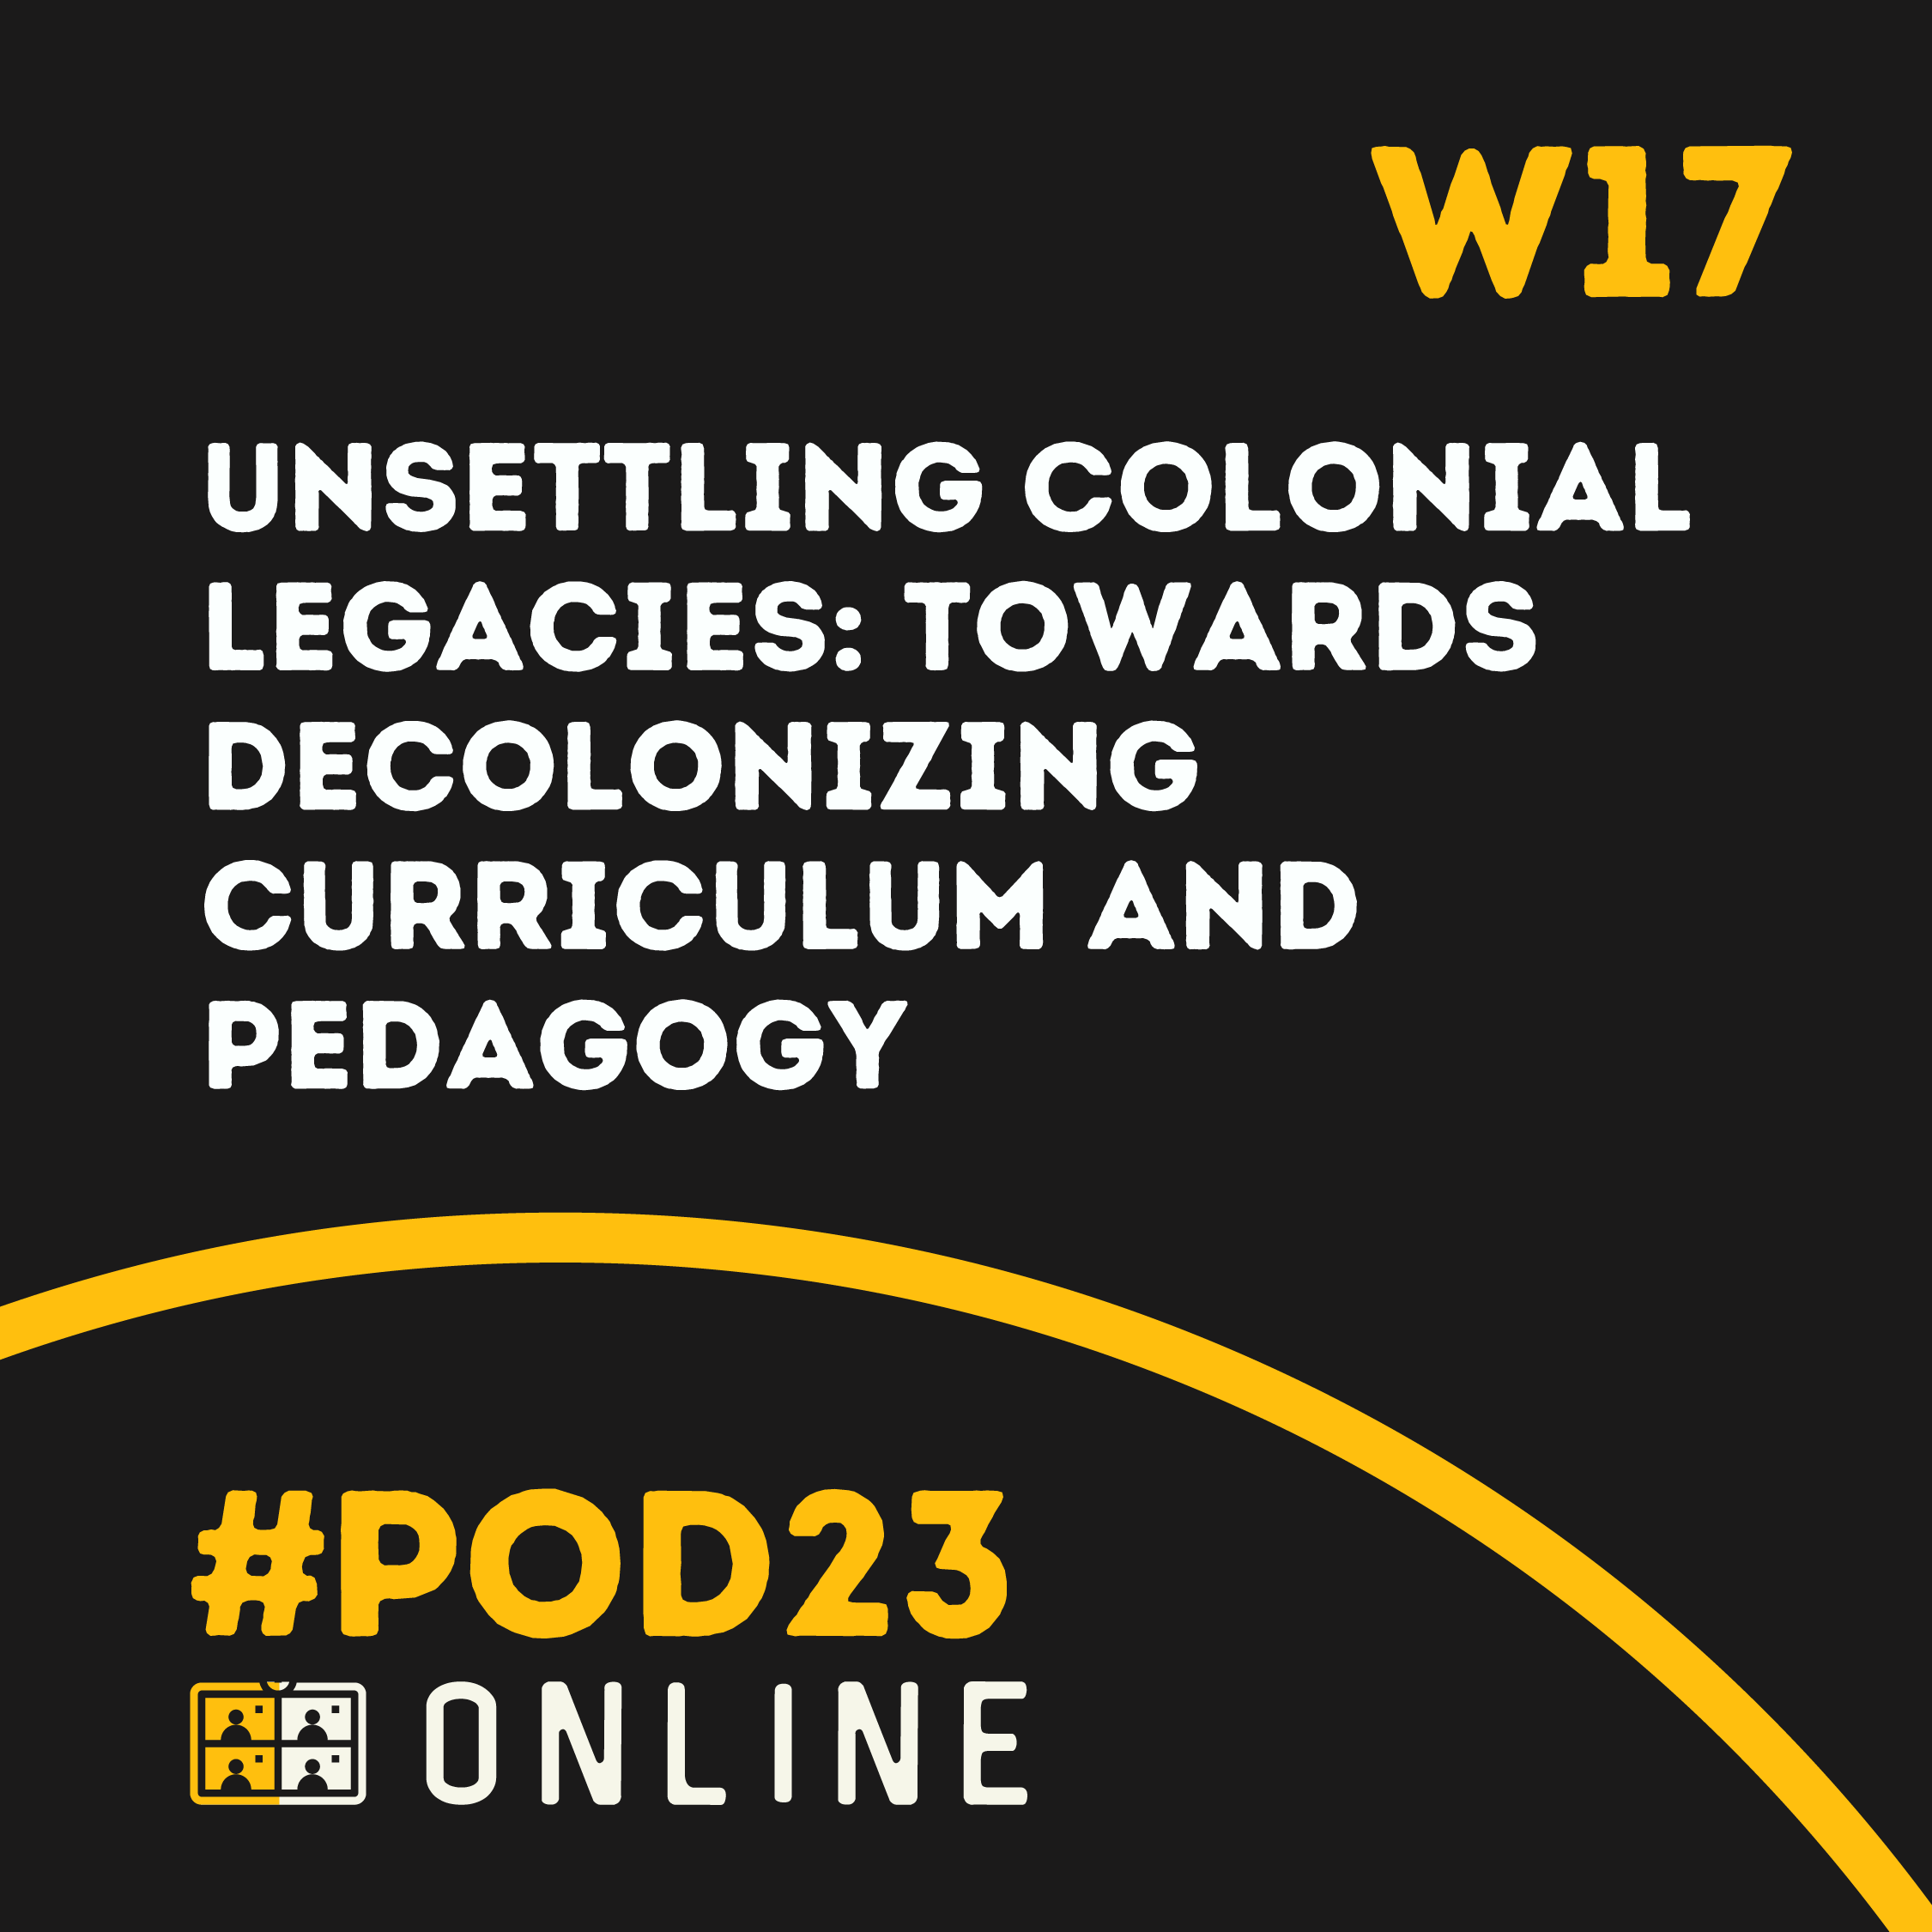 #POD23 Online W17: Unsettling Colonial Legacies: Towards Decolonizing Curriculum and Pedagogy